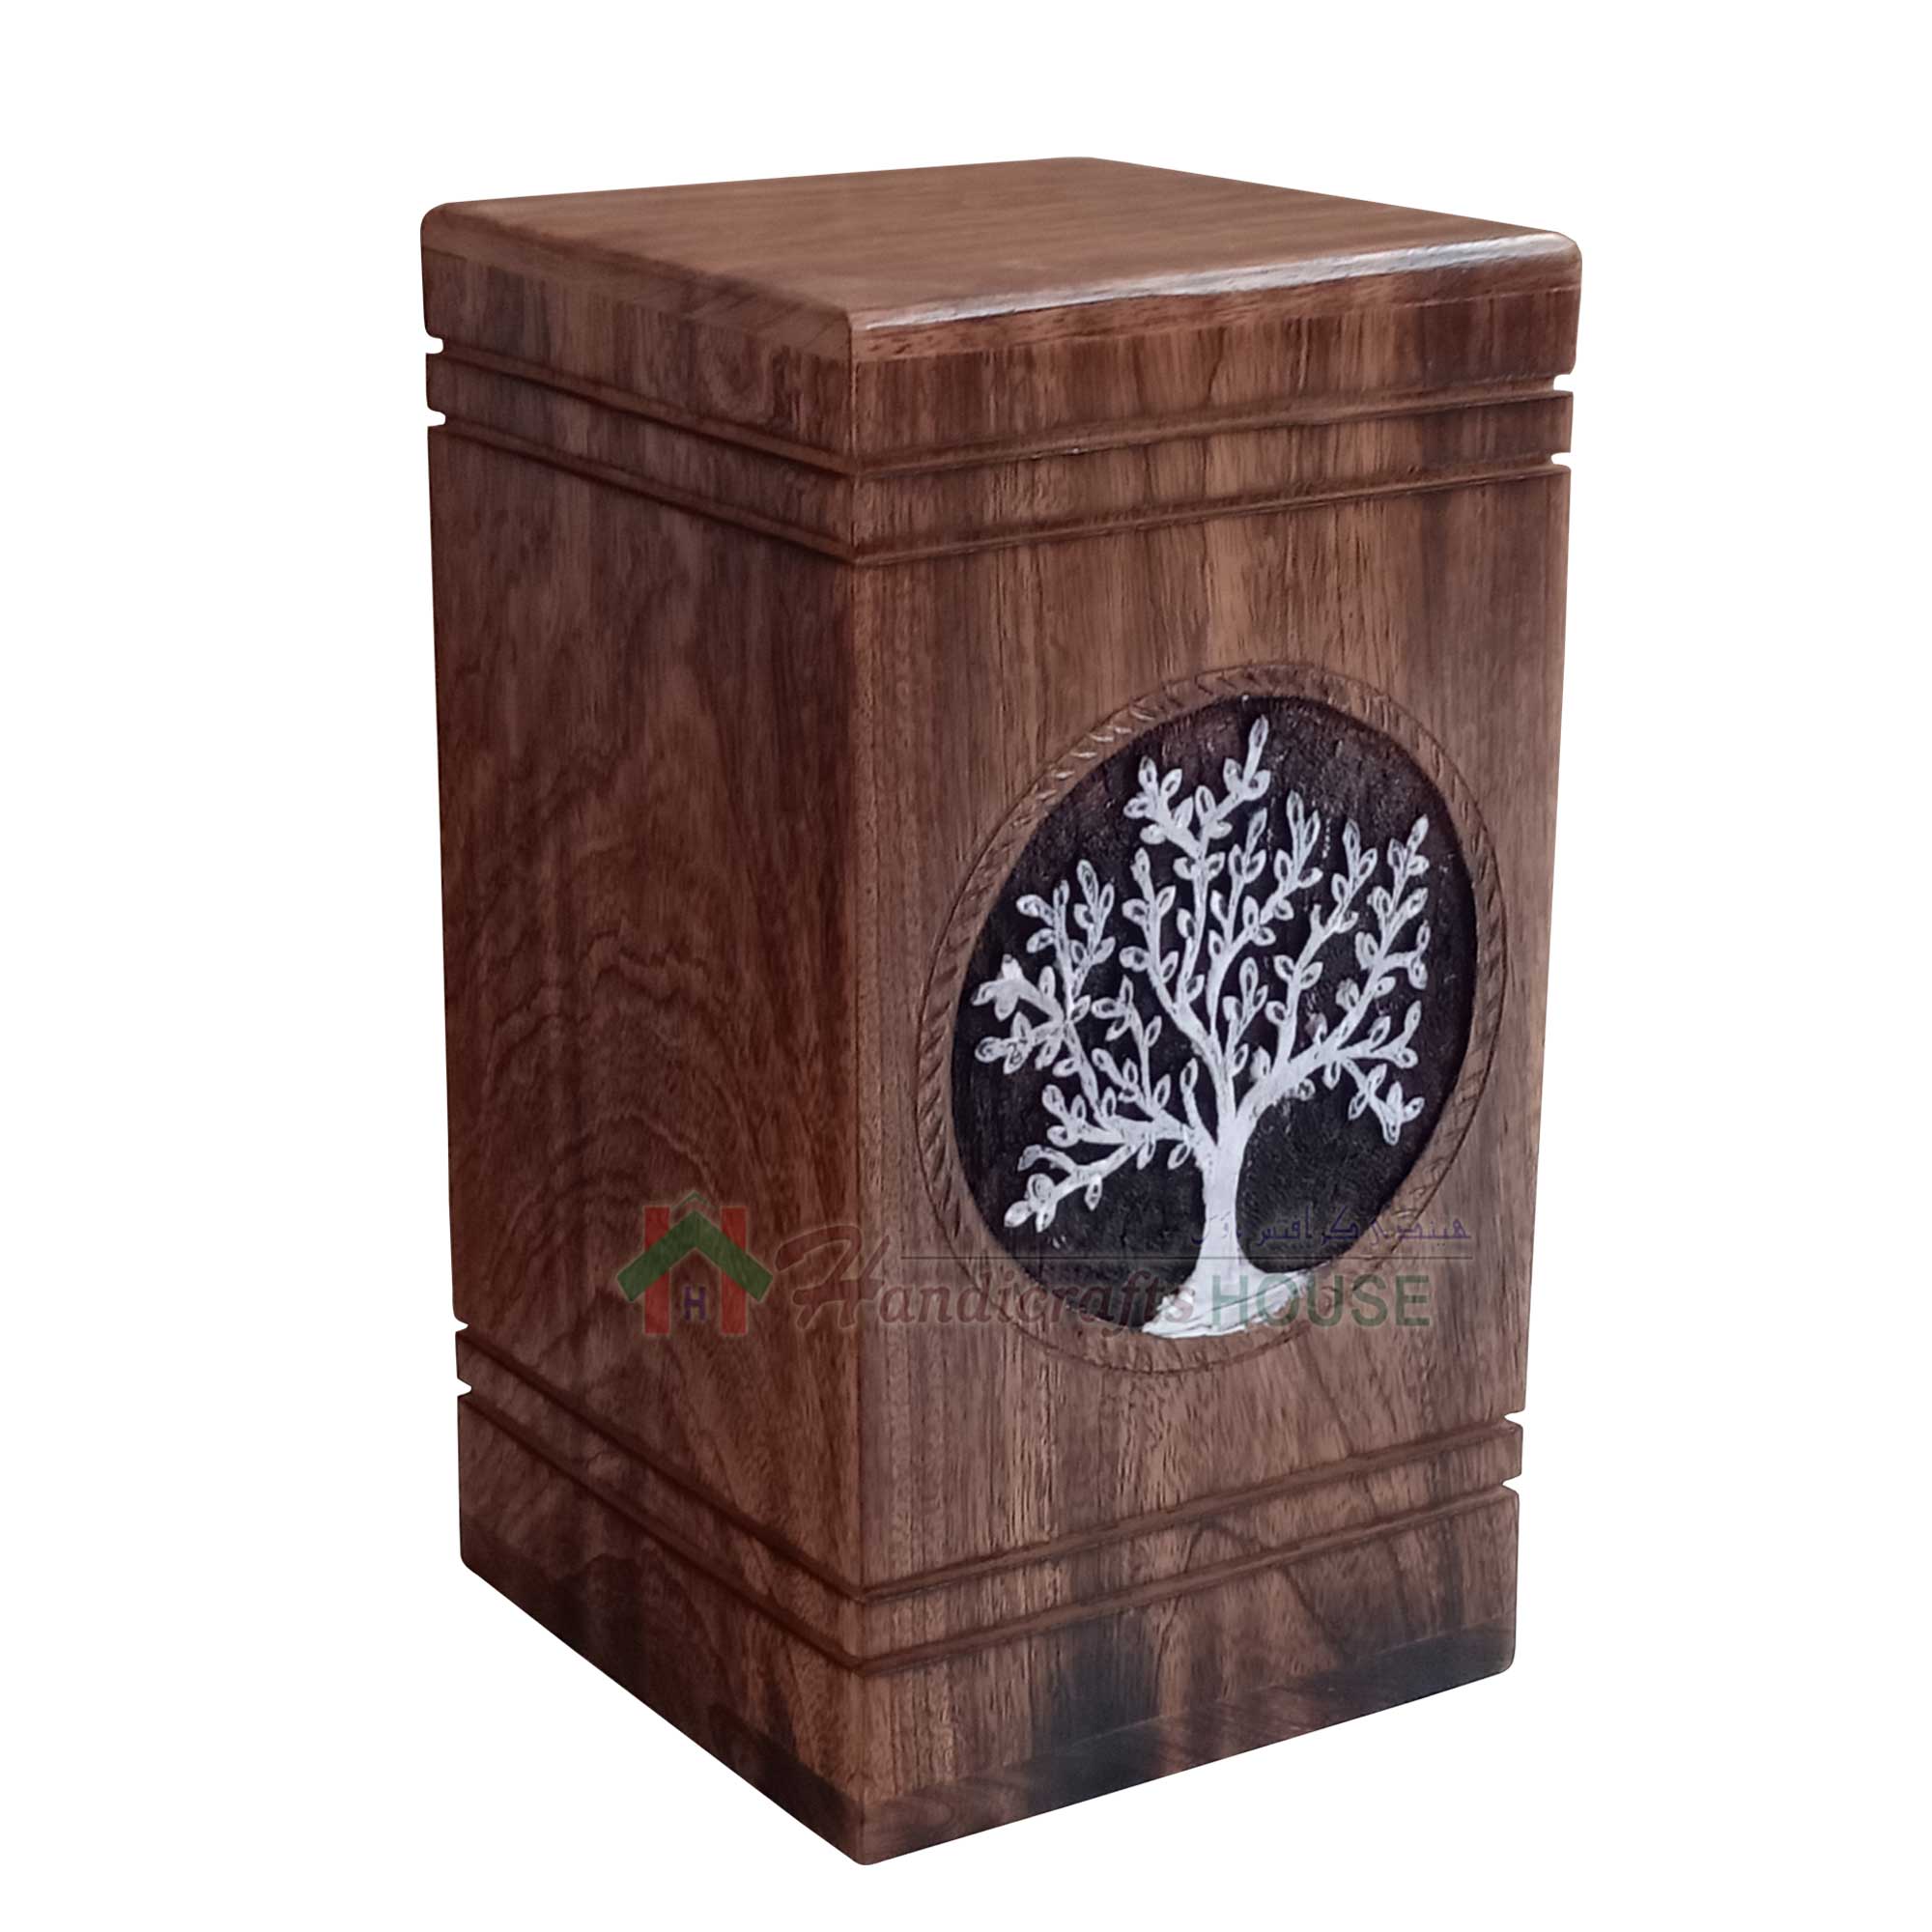 Details about   Wooden urn for Adult Cremains Unique Memorial Funeral Human Ashes or Pet 